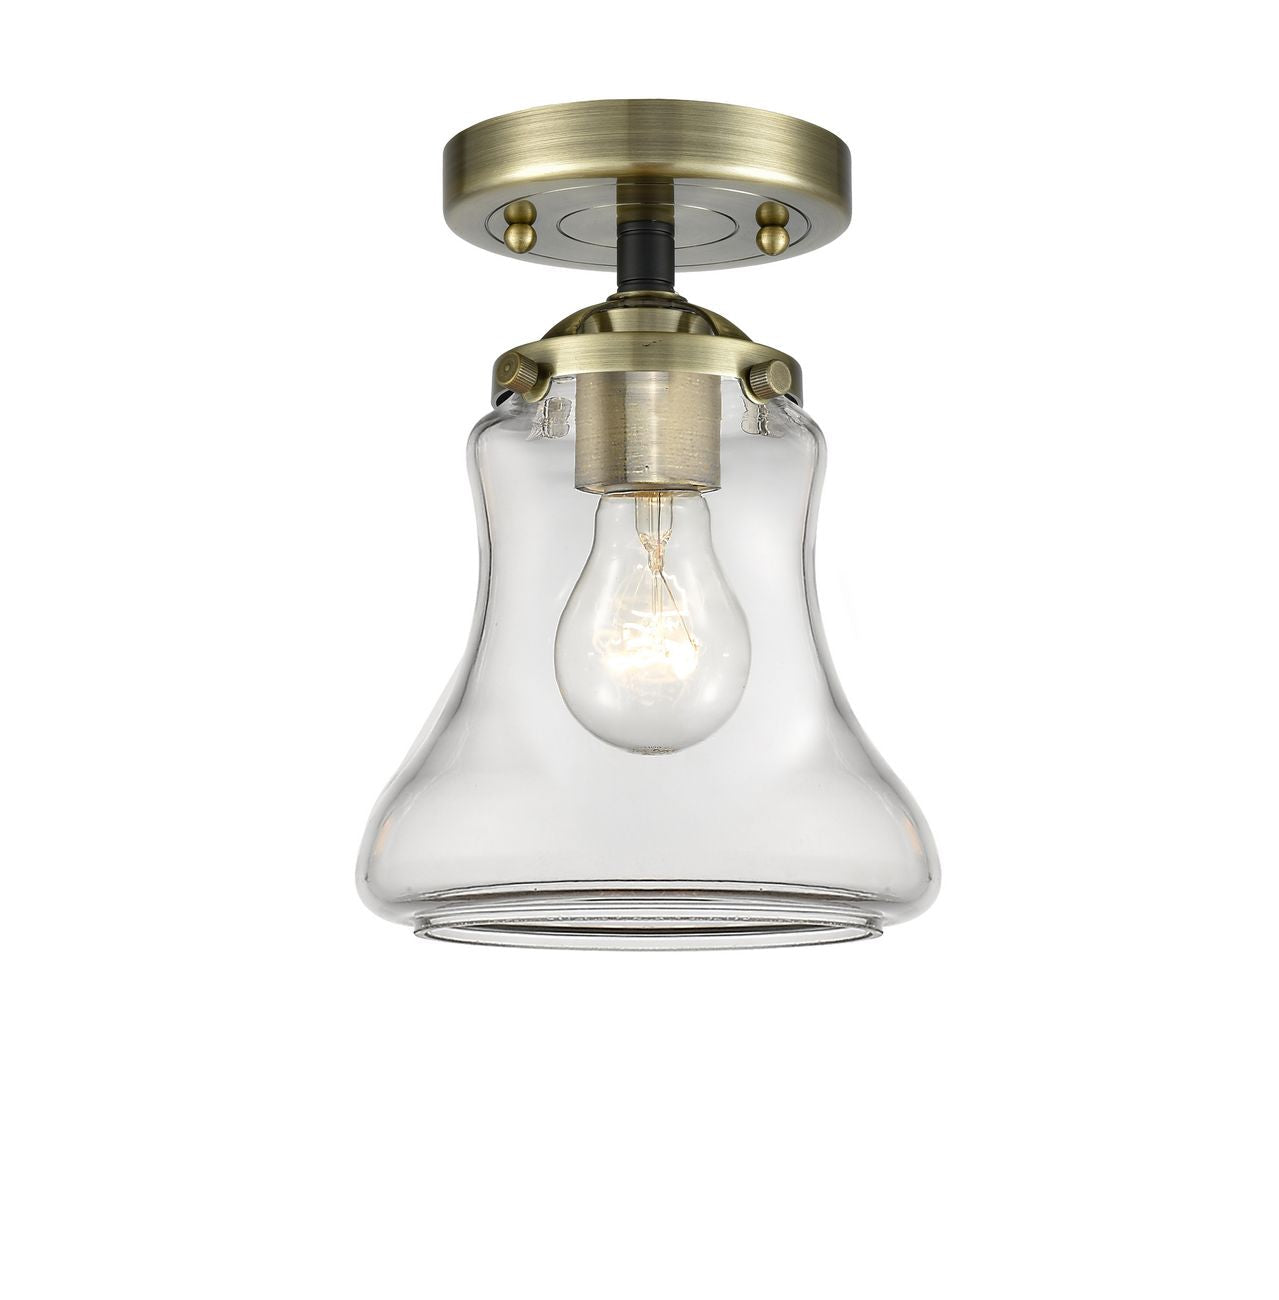 1-Light 6" Bellmont Semi-Flush Mount - Bell-Urn Clear Glass - Choice of Finish And Incandesent Or LED Bulbs